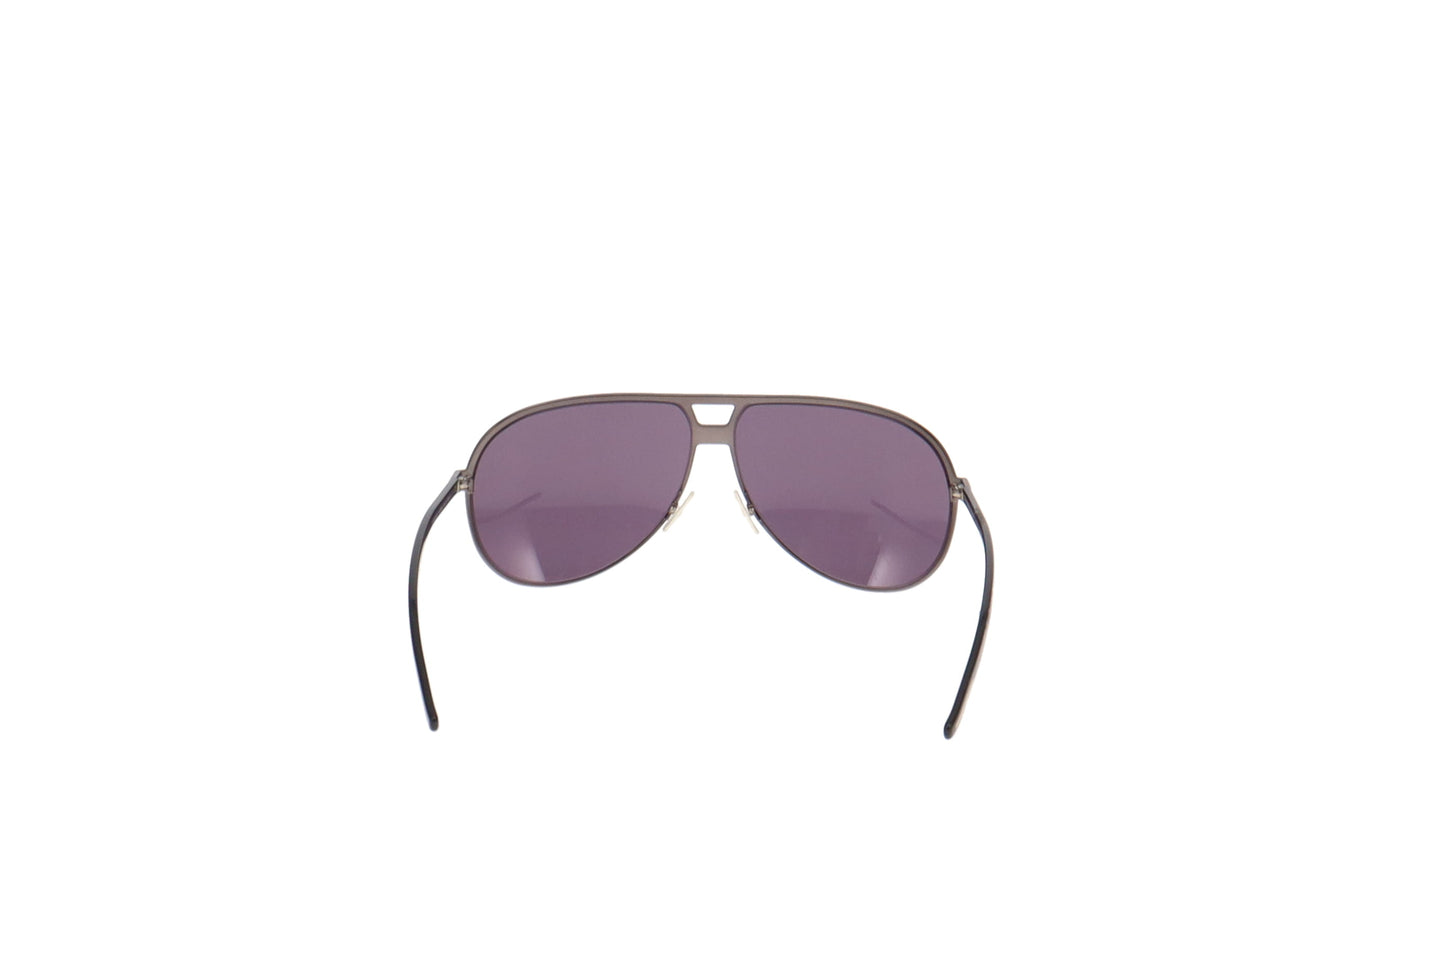 Dior Homme Wrap Aviation Style Sunglasses MGFBN